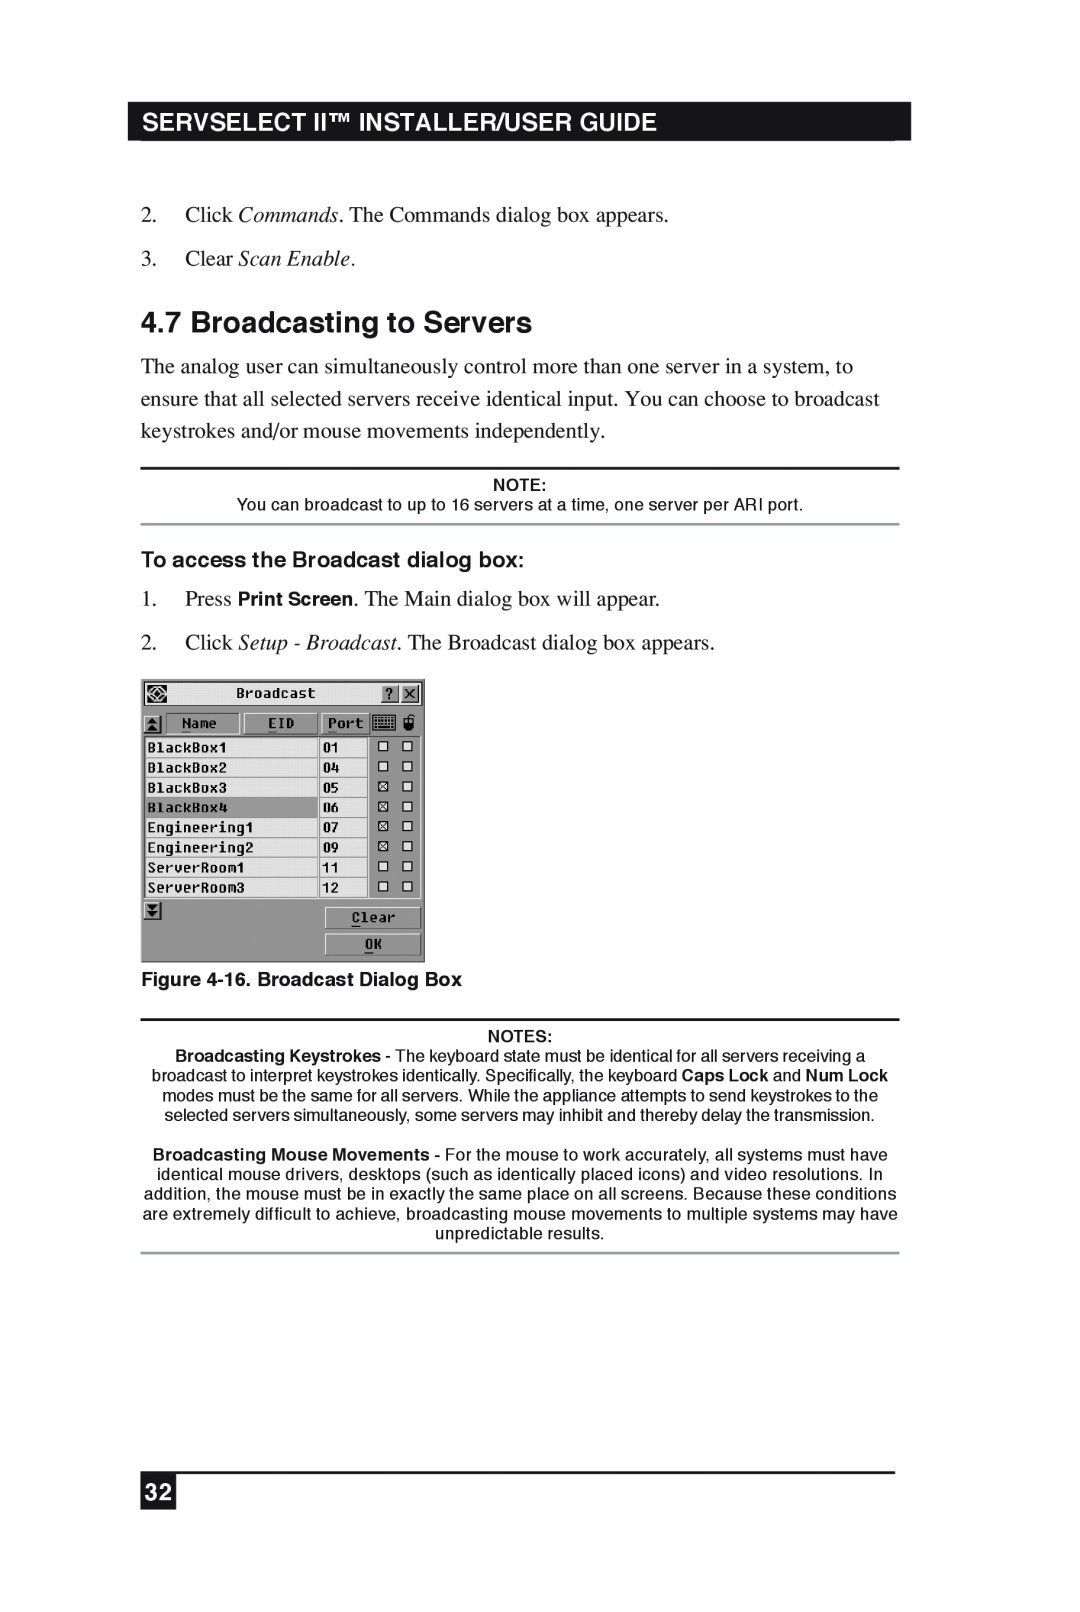 Black Box KV2016E Broadcasting to Servers, Clear Scan Enable, To access the Broadcast dialog box, 16. Broadcast Dialog Box 